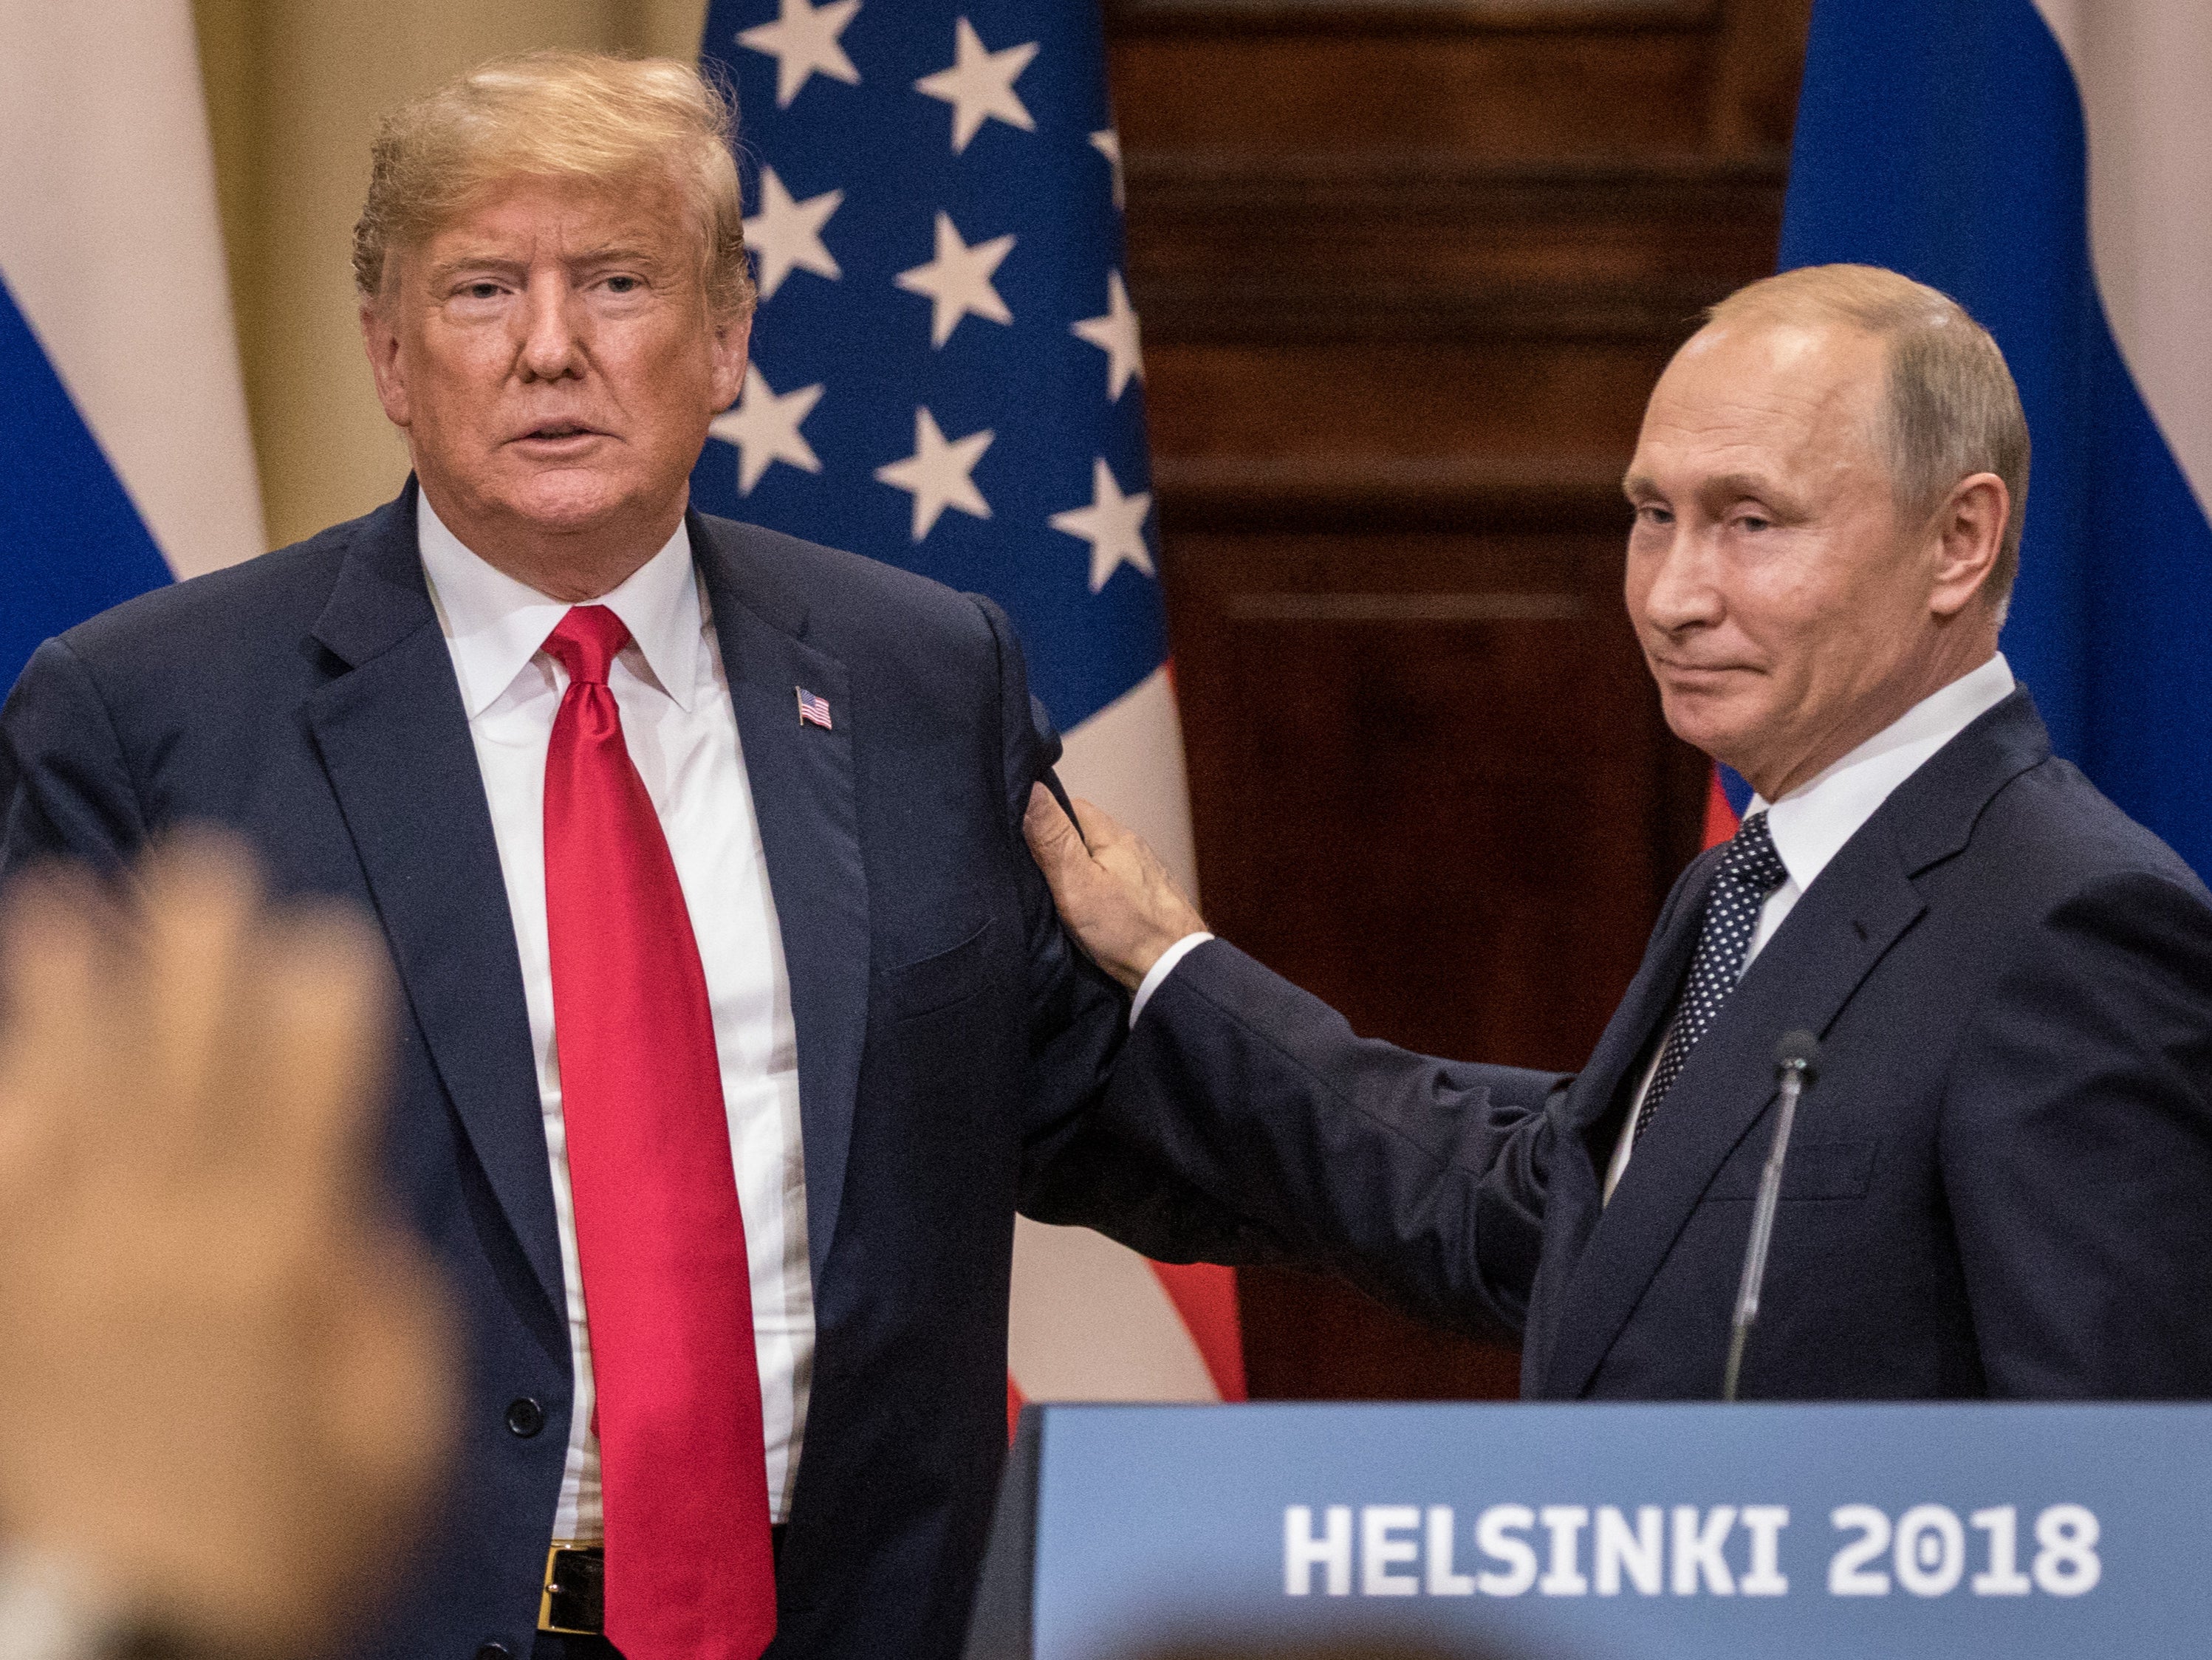 Donald Trump and Russian president Vladimir Putin shake hands at their summit in Helsinki, Finland, on July 16 2018